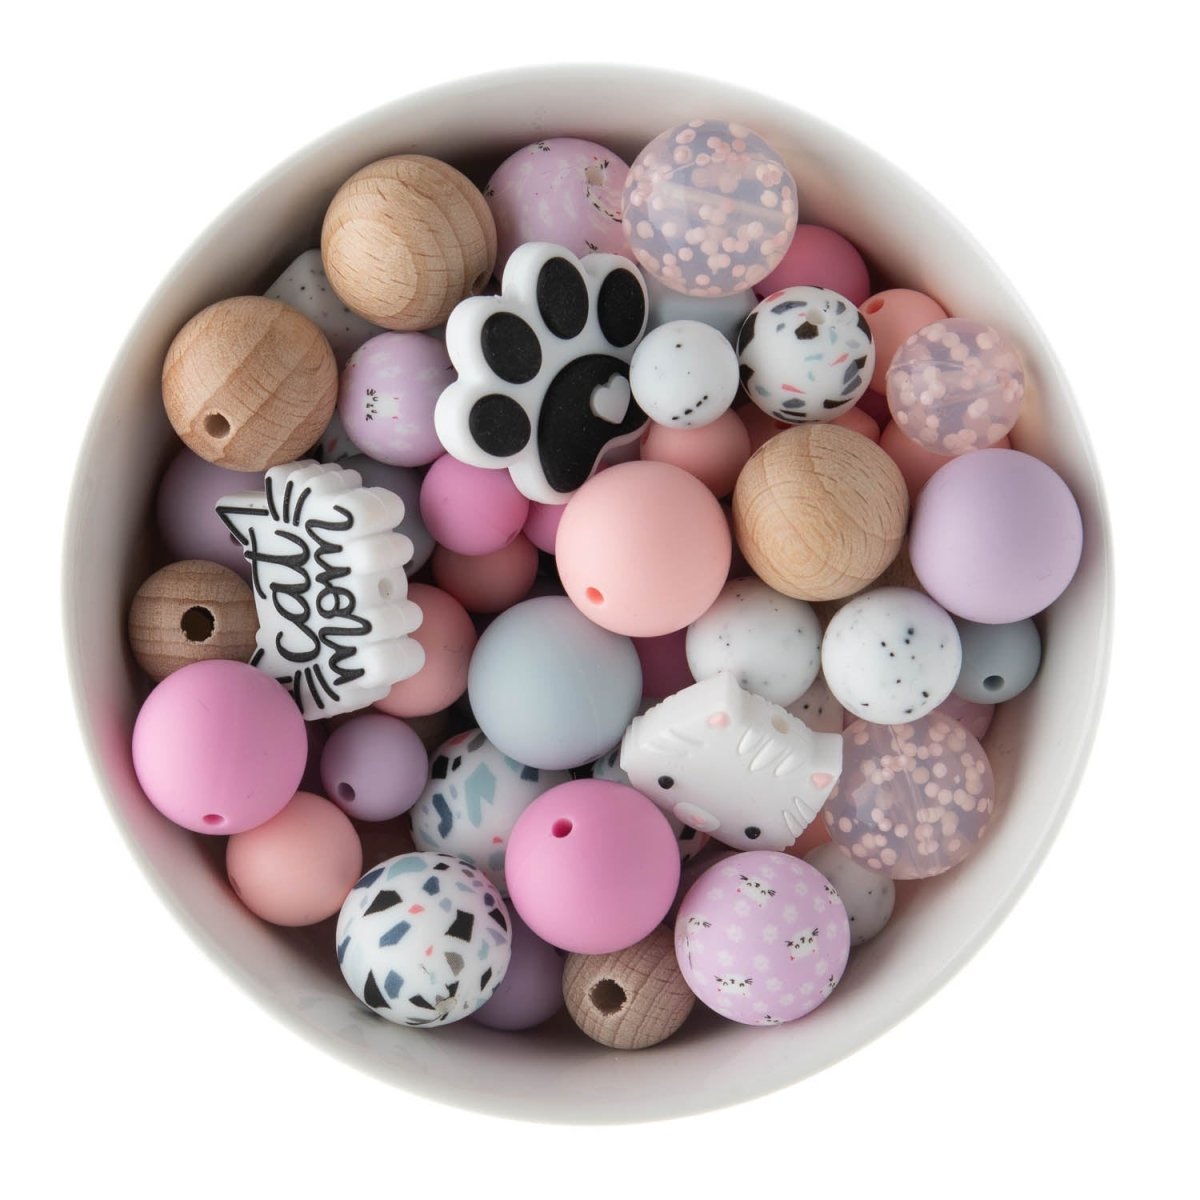 Silicone Bead Packs Kittens Themed Silicone from Cara & Co Craft Supply